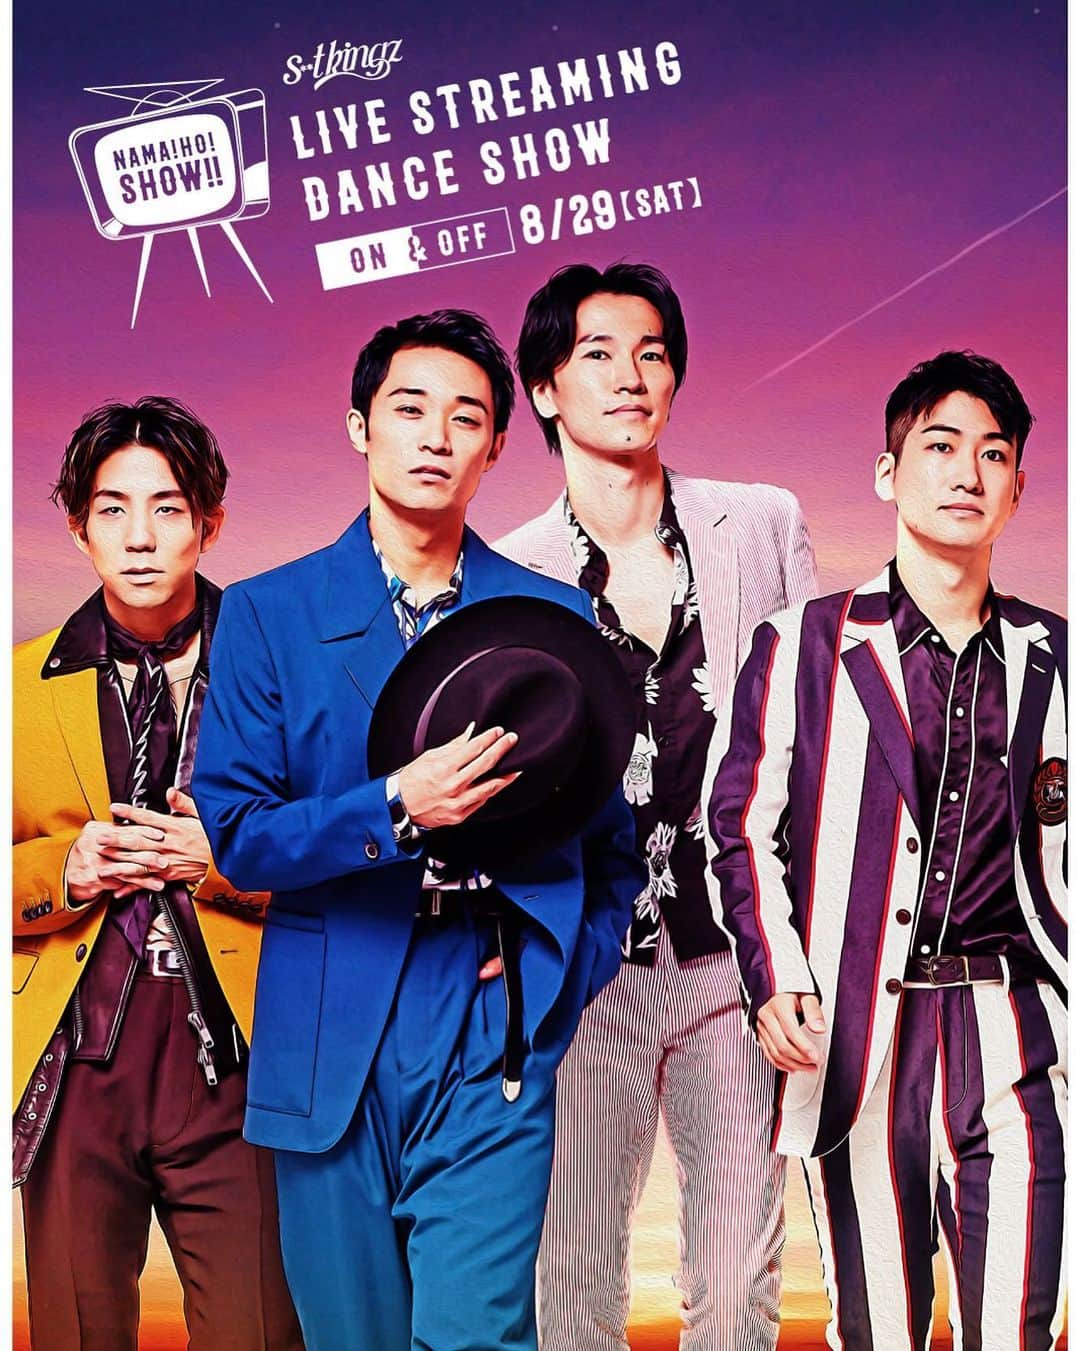 s**t kingzさんのインスタグラム写真 - (s**t kingzInstagram)「『s**t kingz Live streaming dance show「NAMA!HO!SHOW!!～ON&OFF～」』﻿ The information is finally released🔥🔥 For more information, please visit our website.﻿ ﻿ 【s**t kingz COMMENT】﻿ We want to bring smiles to the world by online with s**t kingz entertainment! “NAMA! HO! SHOW!!” , a live streaming dance show that started with the thought, would be fully powered up and started! This time the theme is “ ON & OFF ” . A new on-parade made for this day! We are particular about the performance of s**t kingz, which is different from the usual stage, such as the closeness, angle and ideas that can be seen by video! The cool s**t kingz, the happy s**t kingz, the s**t kingz who does all the silly things with all of us, this live streaming packed with all of us! Please come, no, please don’t miss it !  You have to come to see it ! ﻿ ﻿ ﻿ 『s**t kingz Live streaming dance show「NAMA!HO!SHOW!!～ON&OFF～」』﻿ ﻿ ついに‼️﻿ 8月29日(土)に開催される生配信ダンスショー🕺✨﻿ ﻿ NAMA!HO!SHOW!! 〜ON&OFF 〜の﻿ 詳細&ビジュアルが本日解禁🔥🔥﻿ ﻿ 【s**t kingz コメント】﻿ オンラインで世界中にs**t kingz のエンターテインメントで笑顔を届けたい!という思いで始まった生配信ダンスショー「NAMA! HO! SHOW!!」がパワーアップして本格始動しま す!今回のテーマは「ON&OFF」。この日のために作られた新作のオンパレードです! 映像だから観れる近さ、角度、アイディアなど、普段のステージとは違うs**t kingz のパ フォーマンスにこだわり抜きます!かっこいいs**t kingz も、ハッピーなs**t kingz も、くだらない事を全力でやるs**t kingz も、僕たちの全てを詰め込んだ生配信!是非、いや、 絶対ご覧ください! ﻿ ﻿ 詳細はシットキングス オフィシャル ウェブサイトにてご確認ください✨﻿ ﻿ ‪https://shitkingz.jp/shows/namahoshowonandoff/‬﻿ ﻿ #NAMAHOSHOW﻿ #ナマホウショー﻿ #ONandOFF﻿ #LiveStreaming﻿ #DanceShow﻿ #stkgz﻿」8月3日 16時00分 - stkgz_official